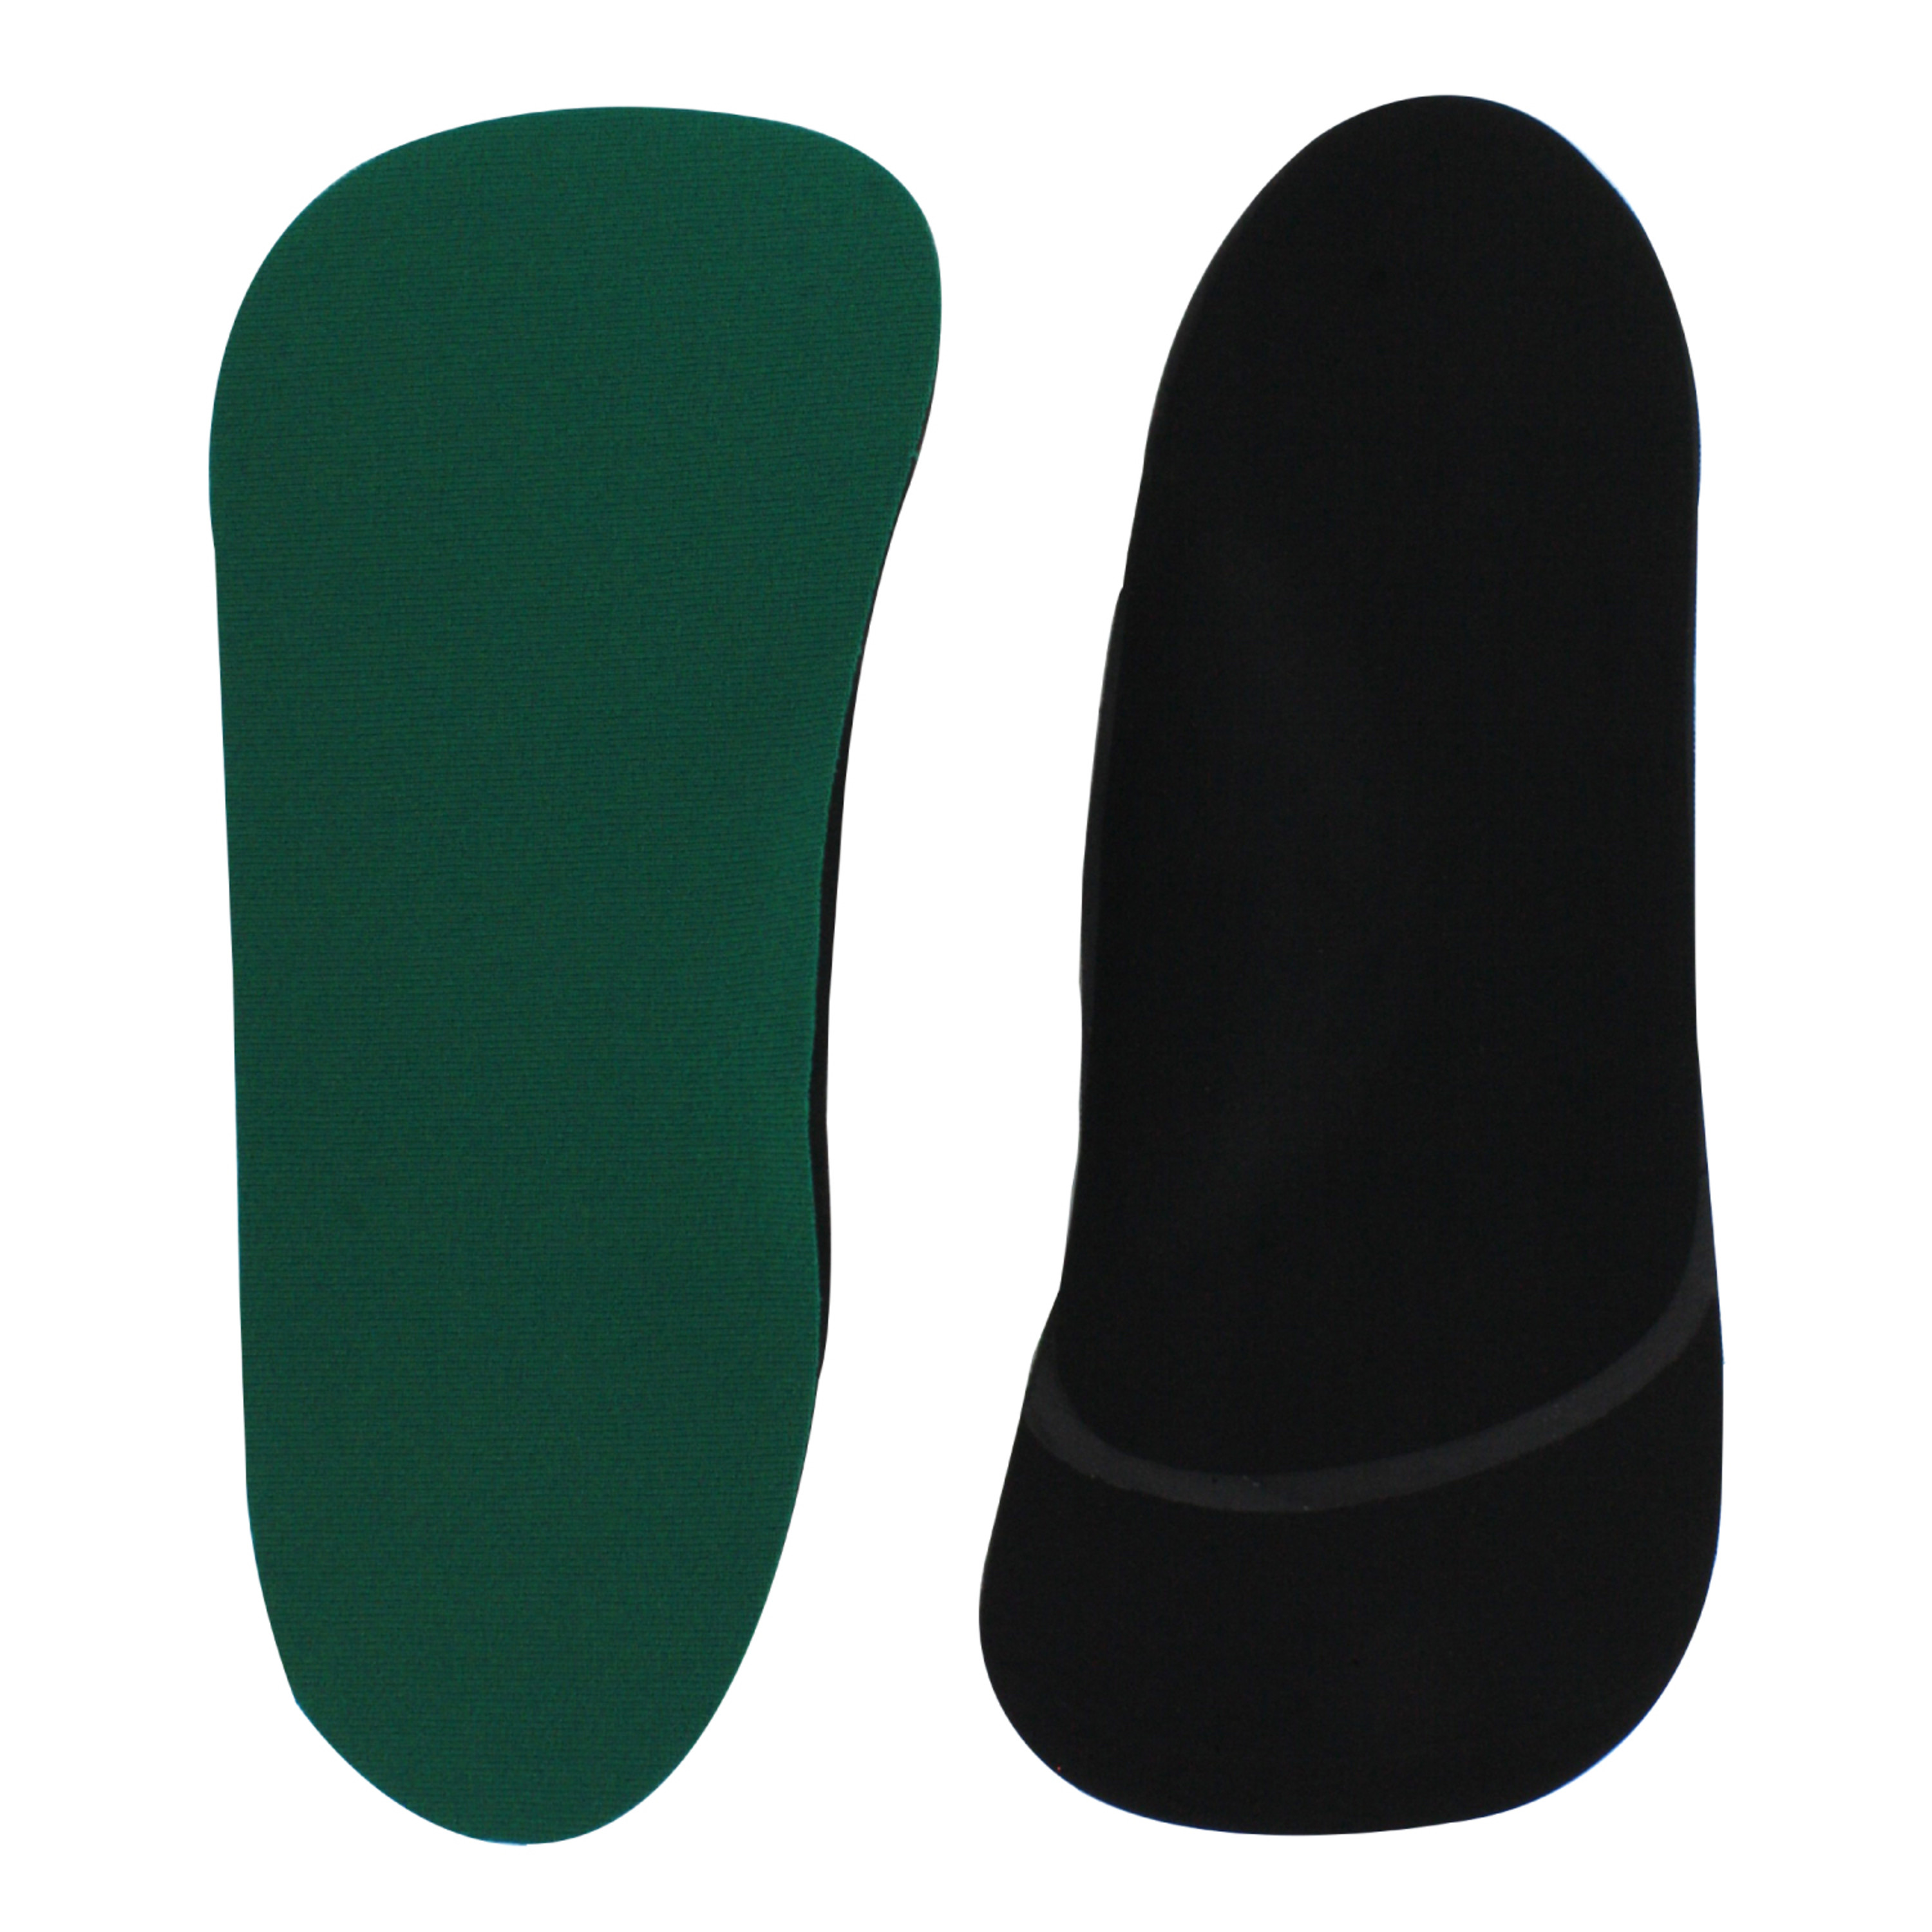 Spenco Rx Arch Cushions 3/4 Length Insole - image 3 of 7